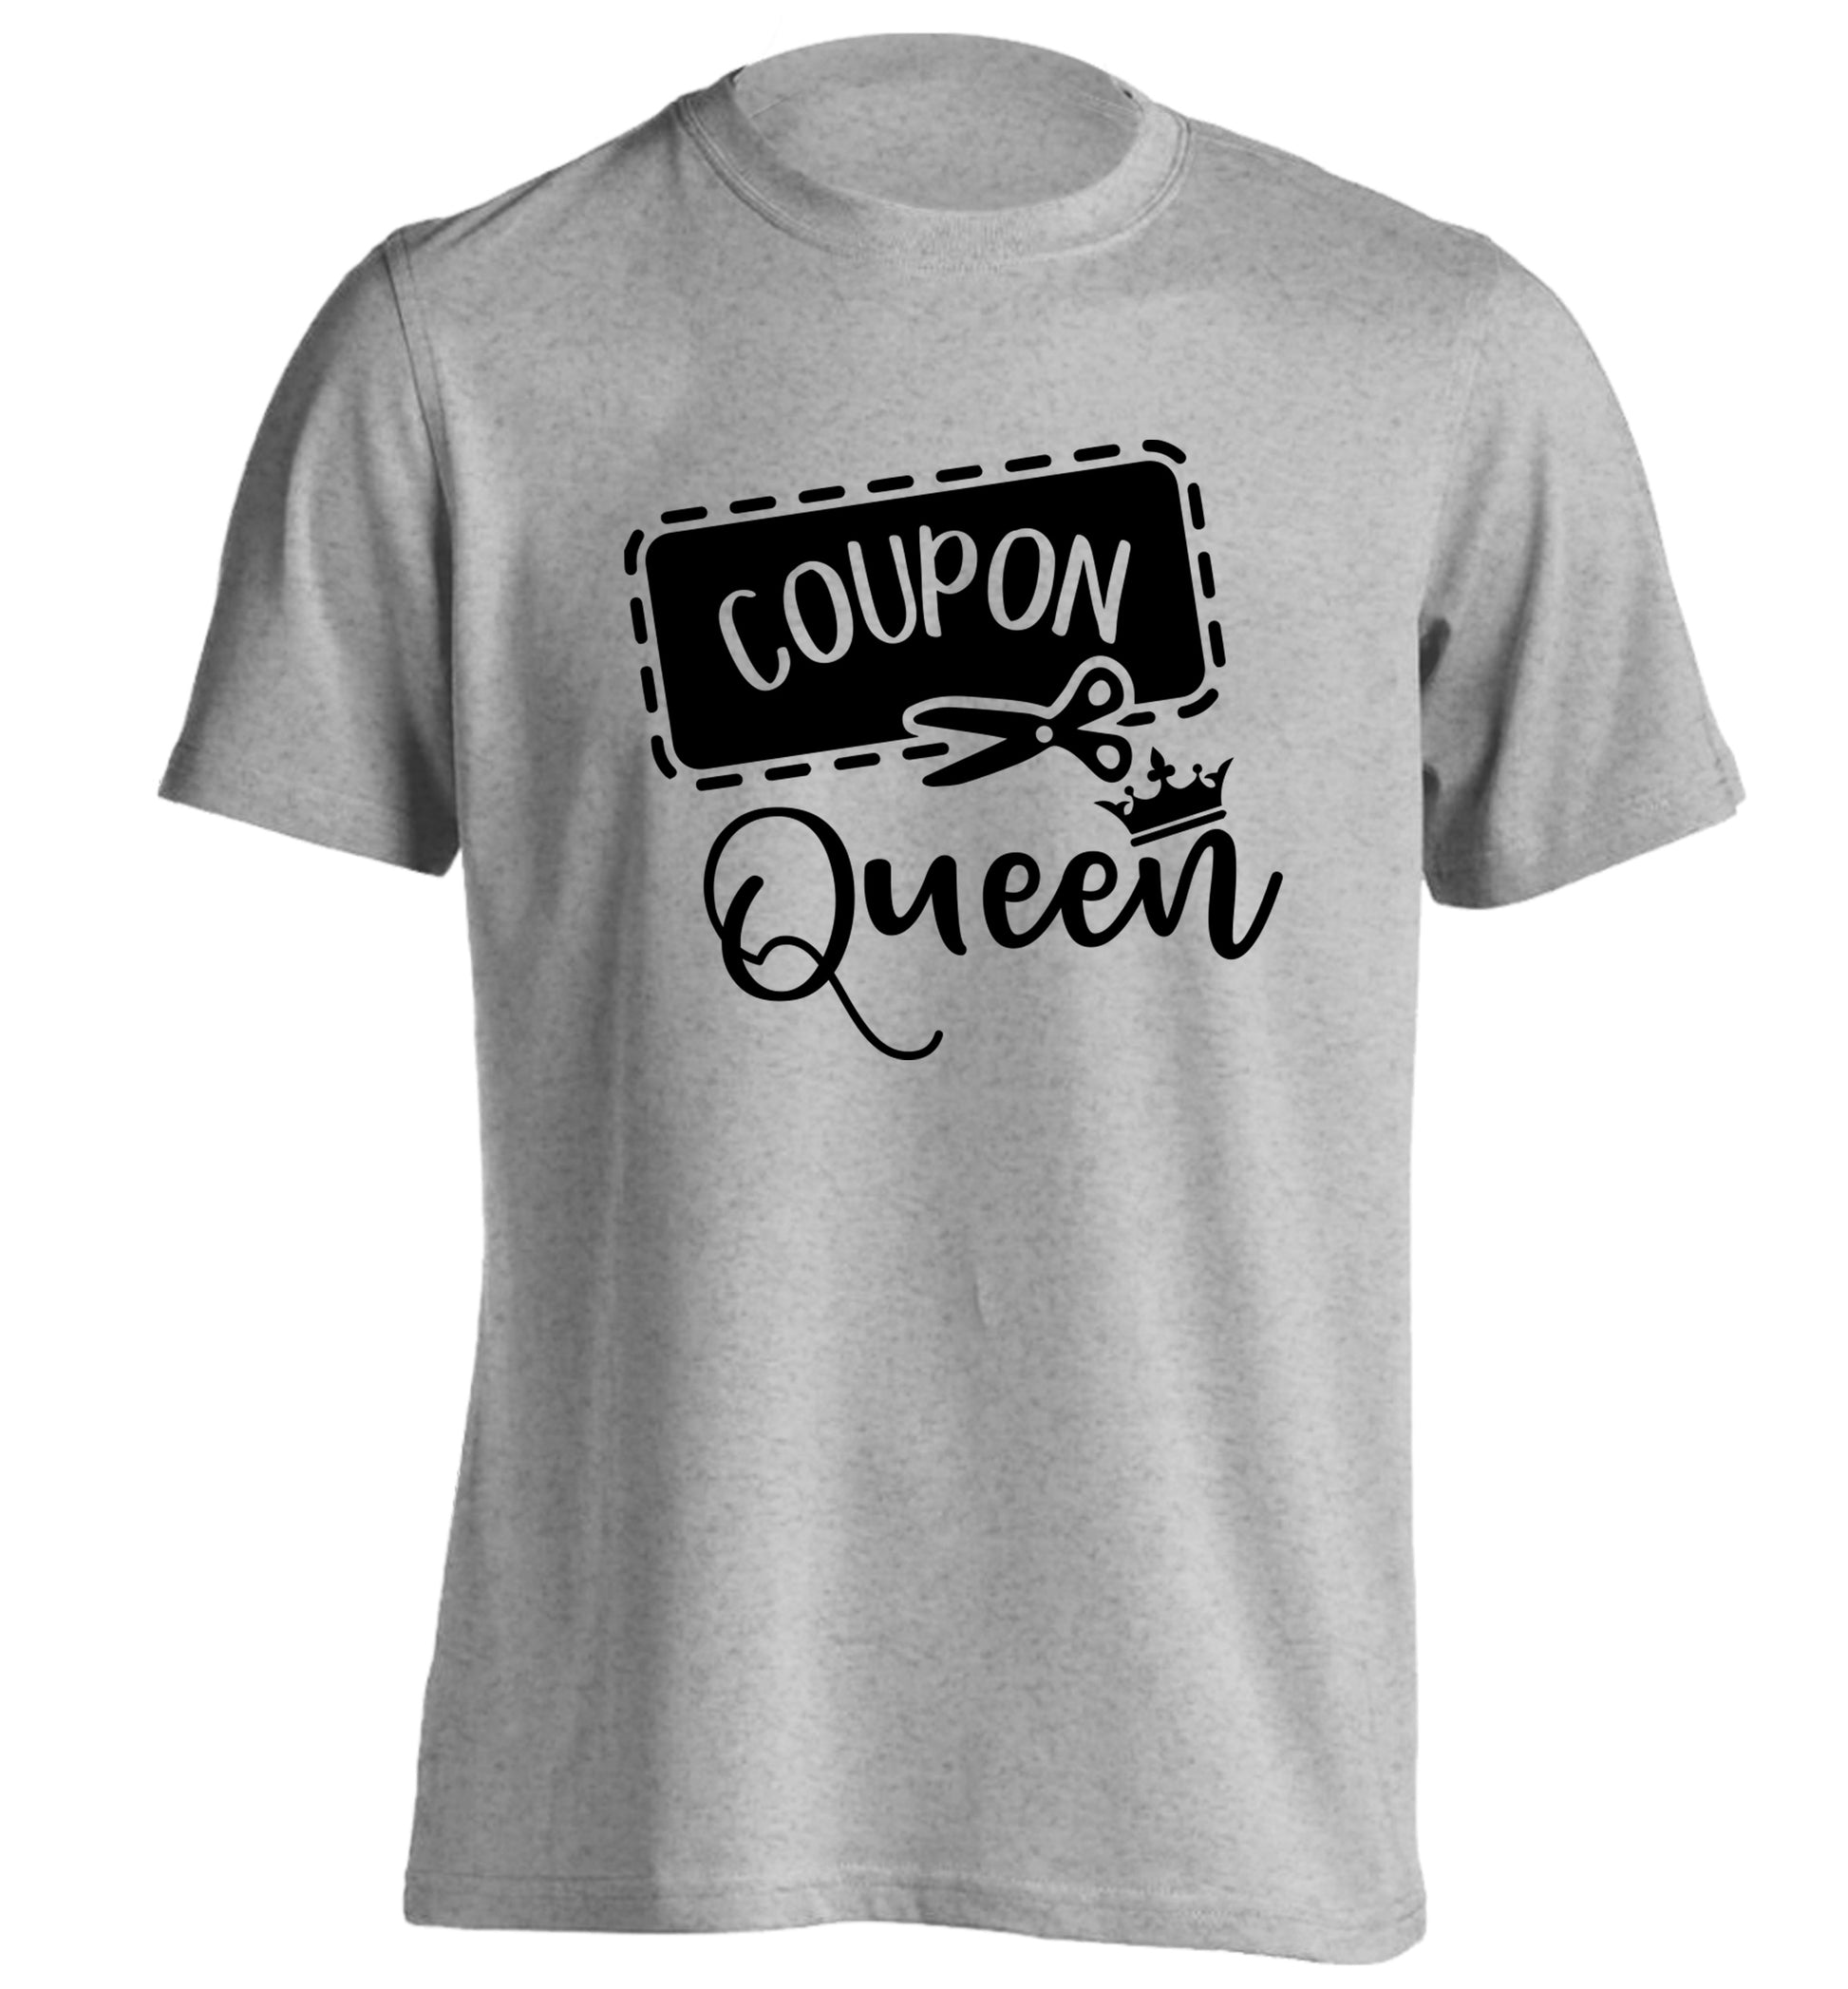 Coupon Queen adults unisex grey Tshirt 2XL